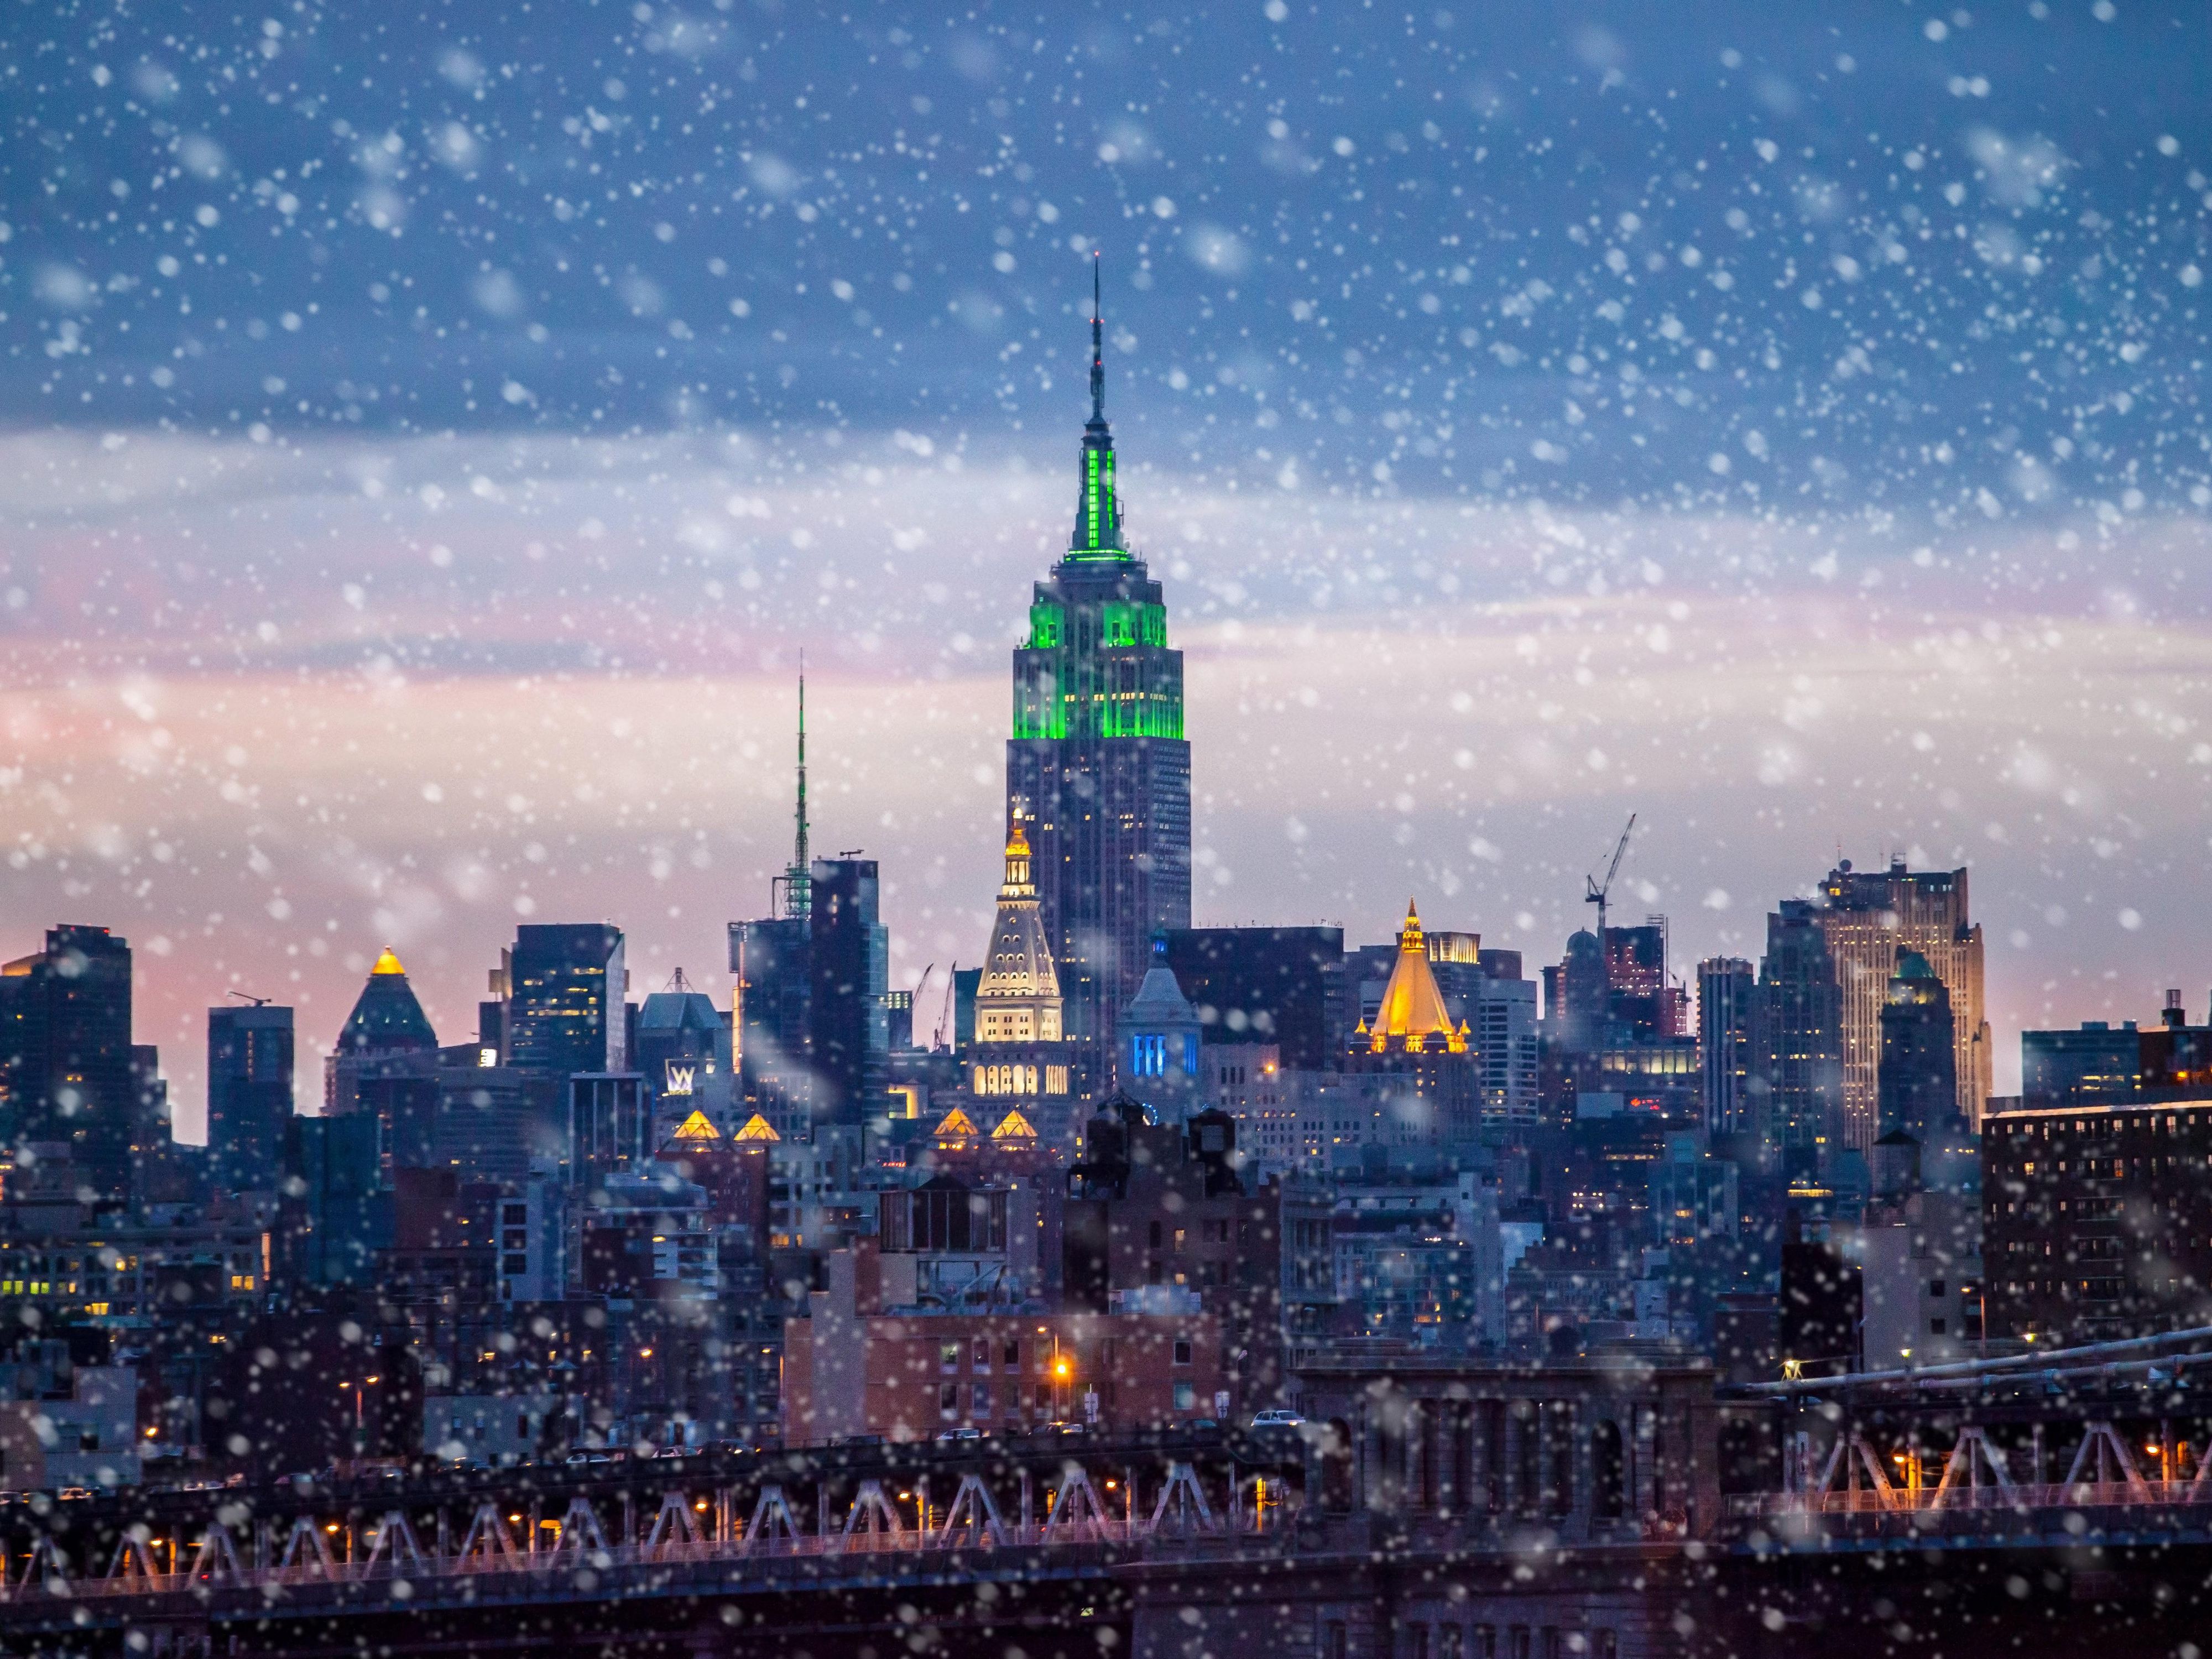 Experience New York City and all its holiday fun this season. Be sure not to miss any of the iconic city events like ice skating in Winter Village at Bryant Park, celebrating at the Macy's Thanksgiving Parade, and counting down at the New Year’s Ball Drop in Times Square, and more.